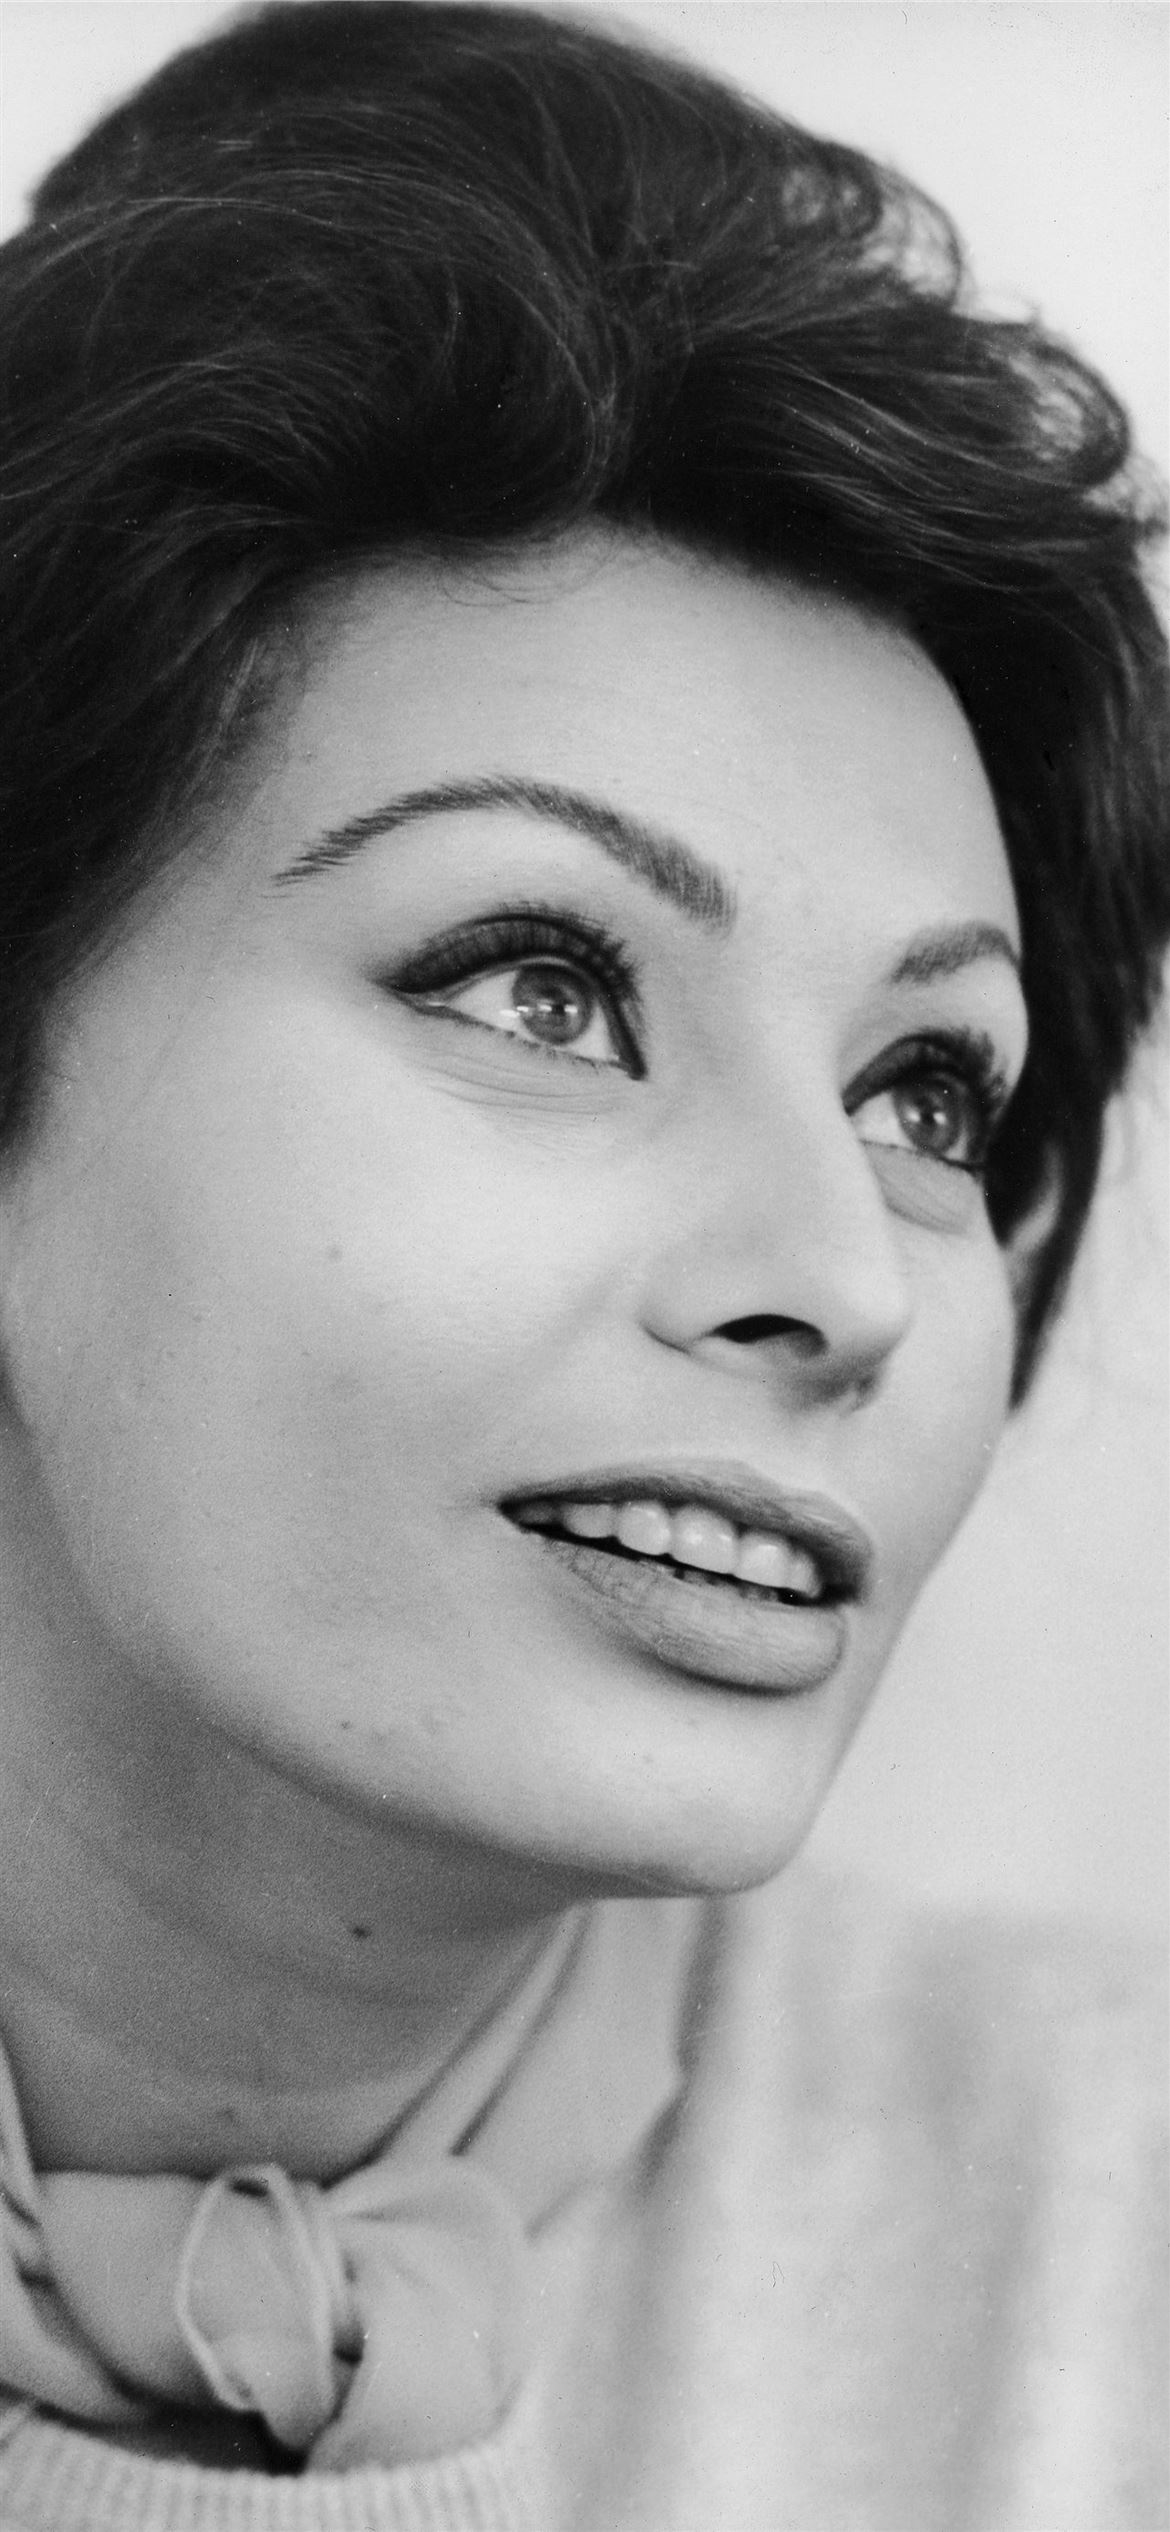 Sophia Loren movies, iPhone wallpapers, Free download, Stylish backgrounds, 1170x2540 HD Phone